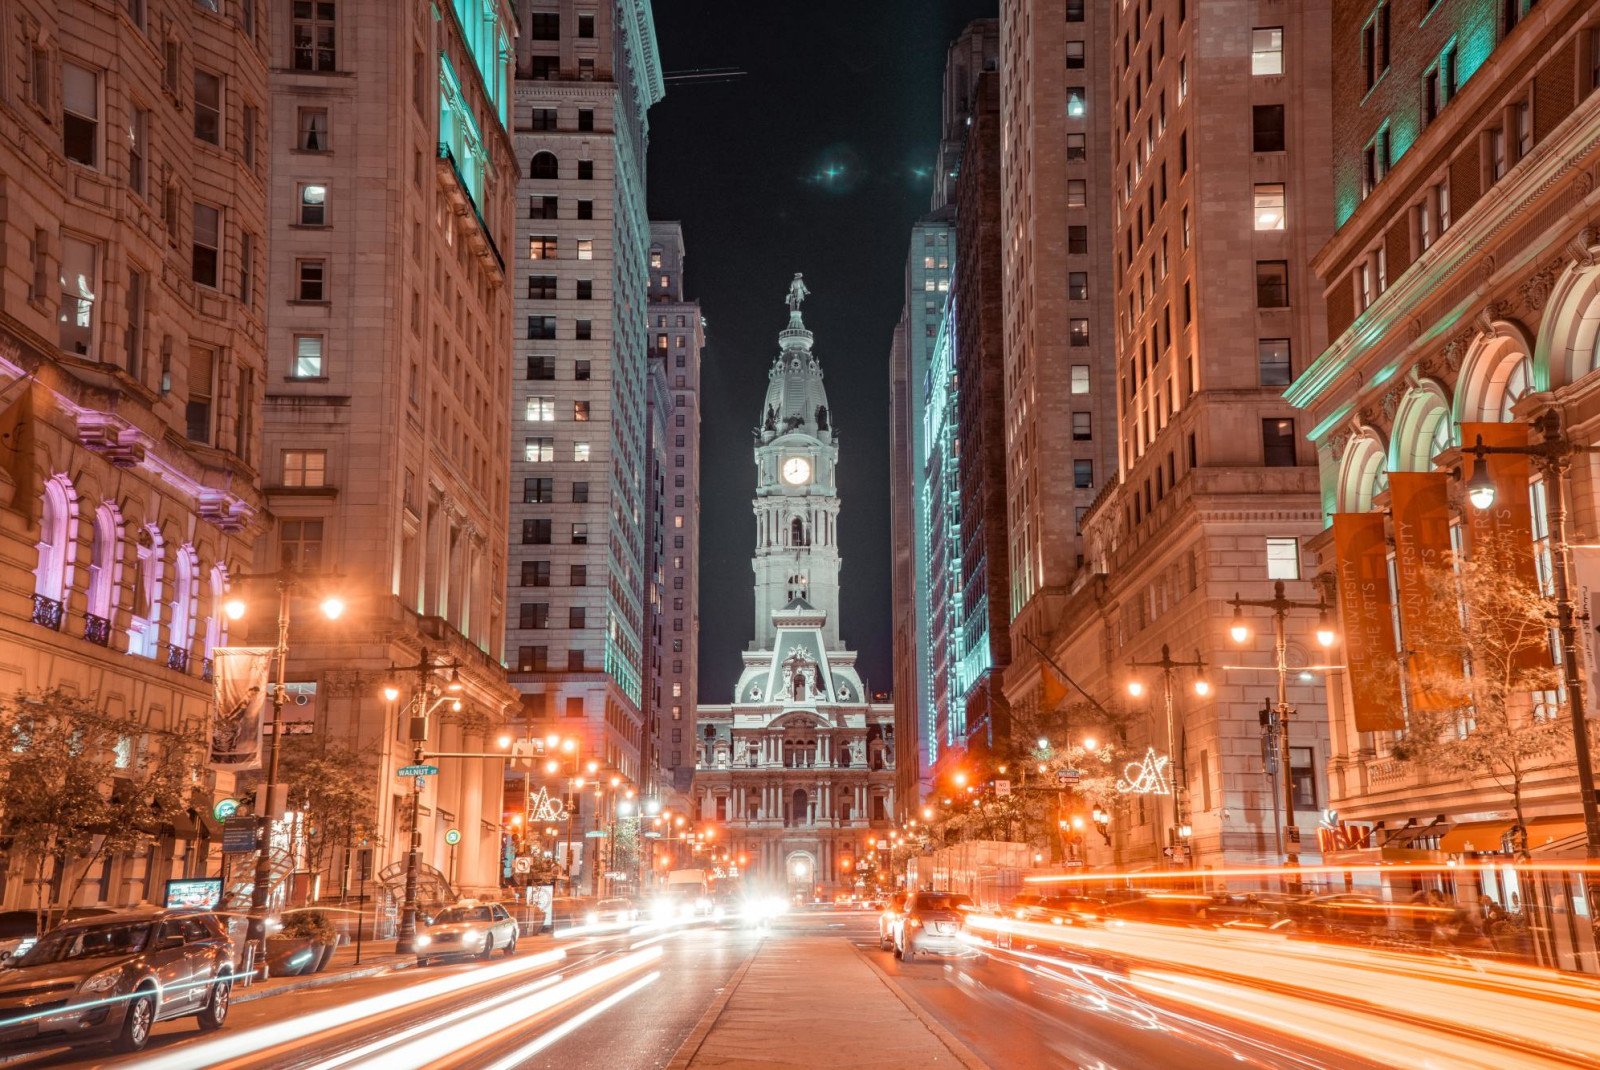 Long exposure shot of street in downtown Philly at night with buildings lightened streetlights and car headlights.